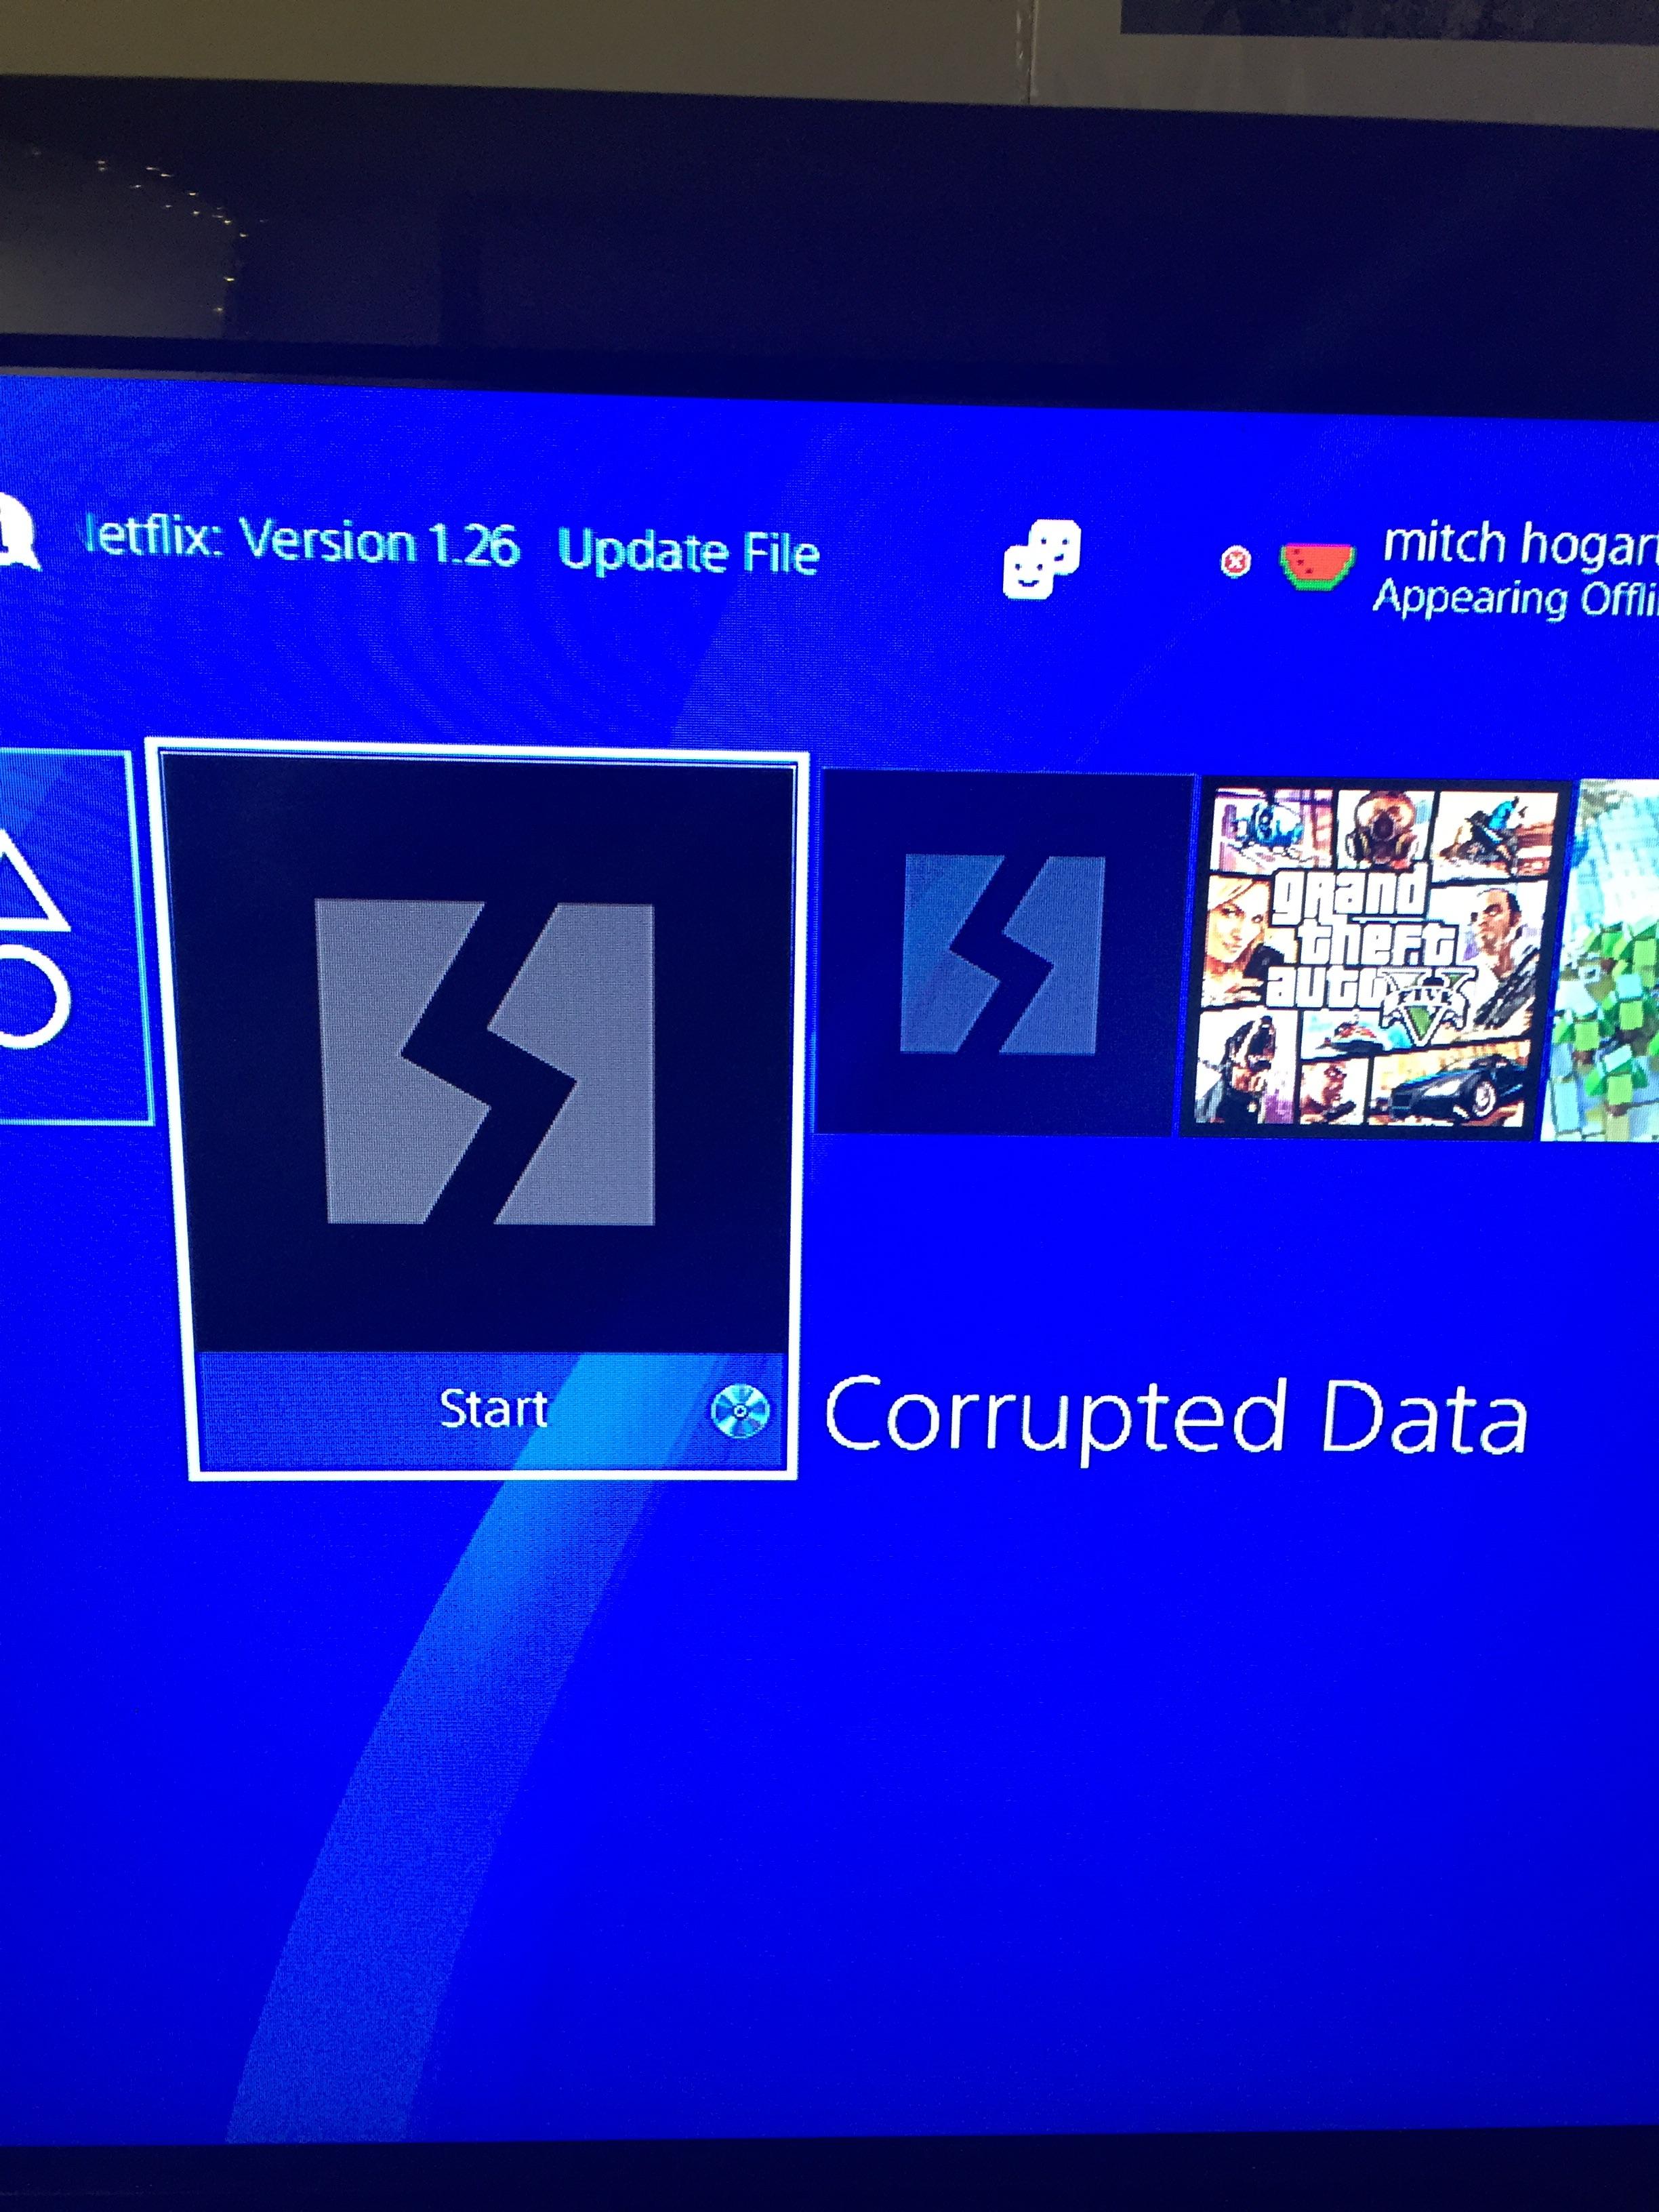 interrupted installation of PS4 system software may get it corrupted and thus cause PS4 to become slow